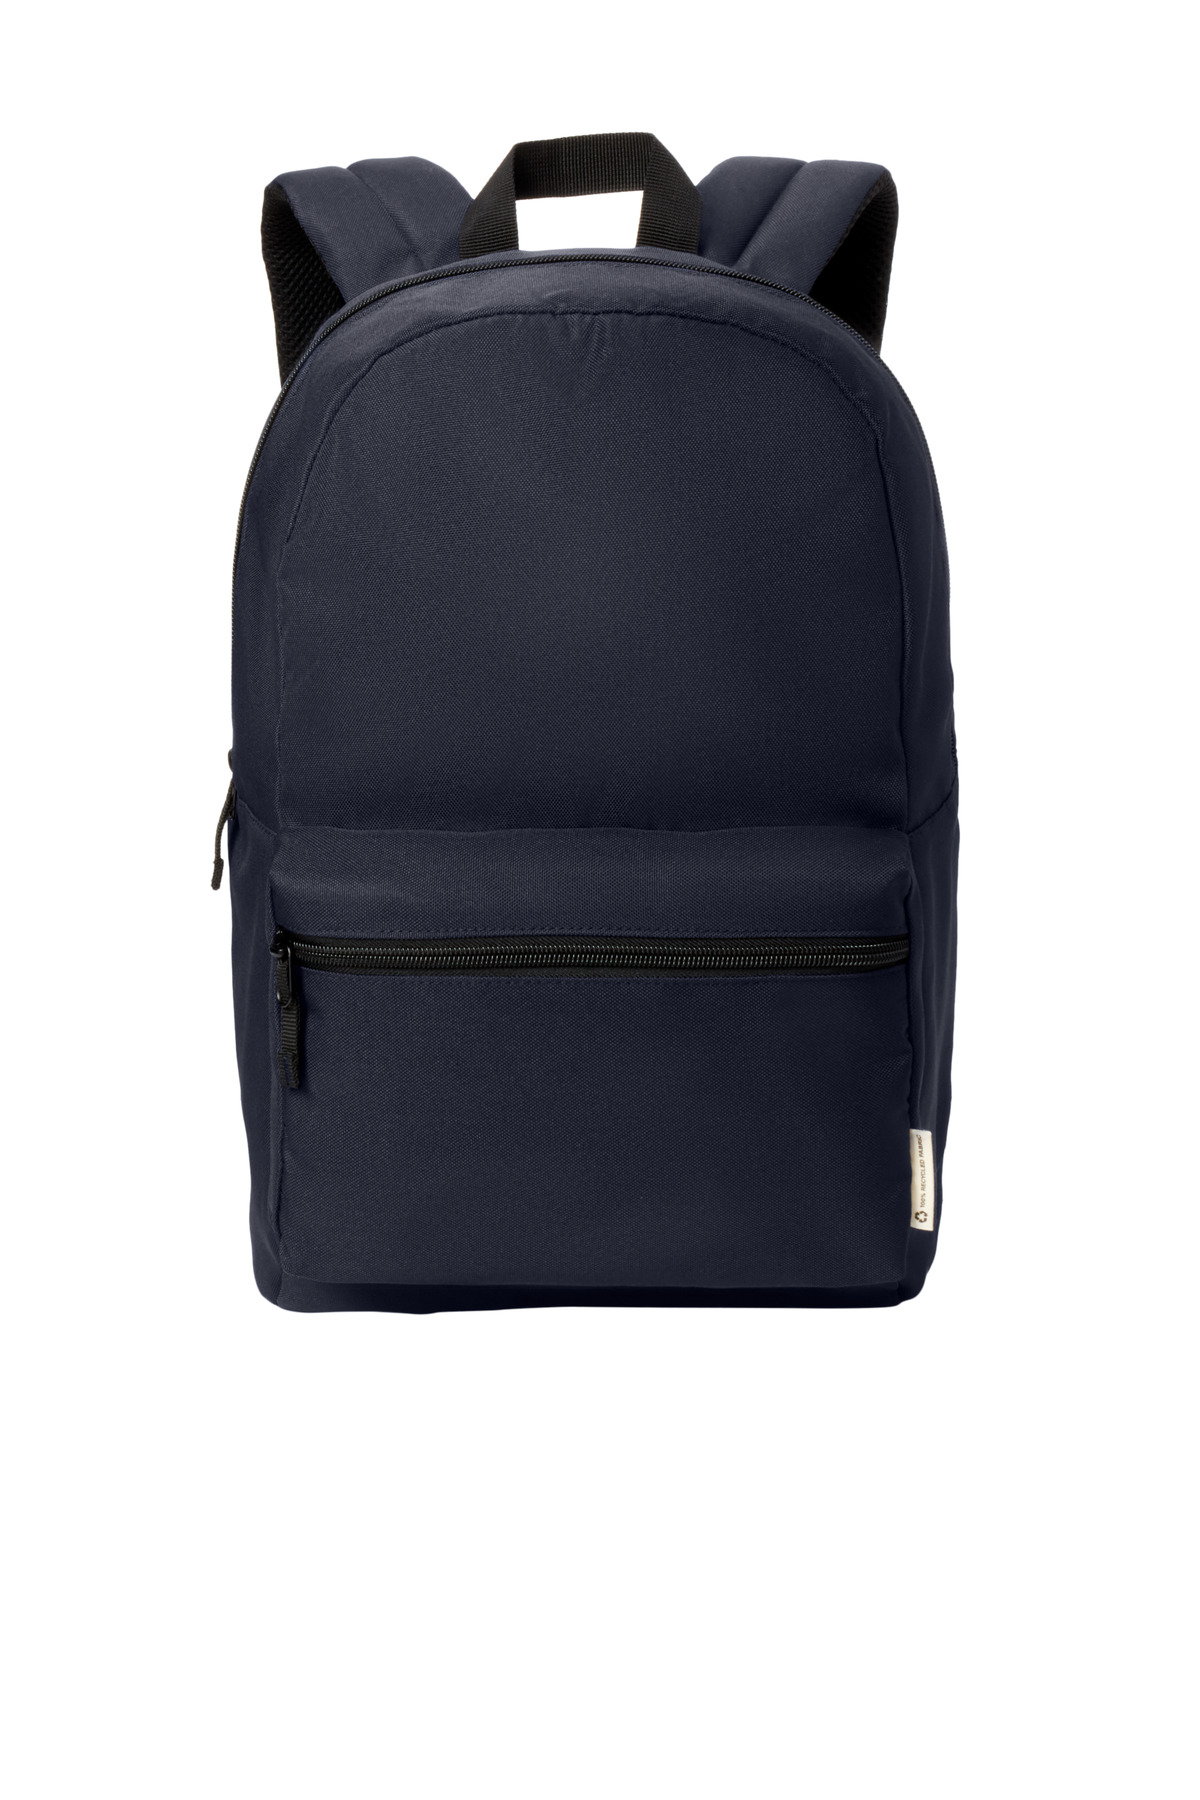 Port Authority C-FREE Recycled Backpack BG270